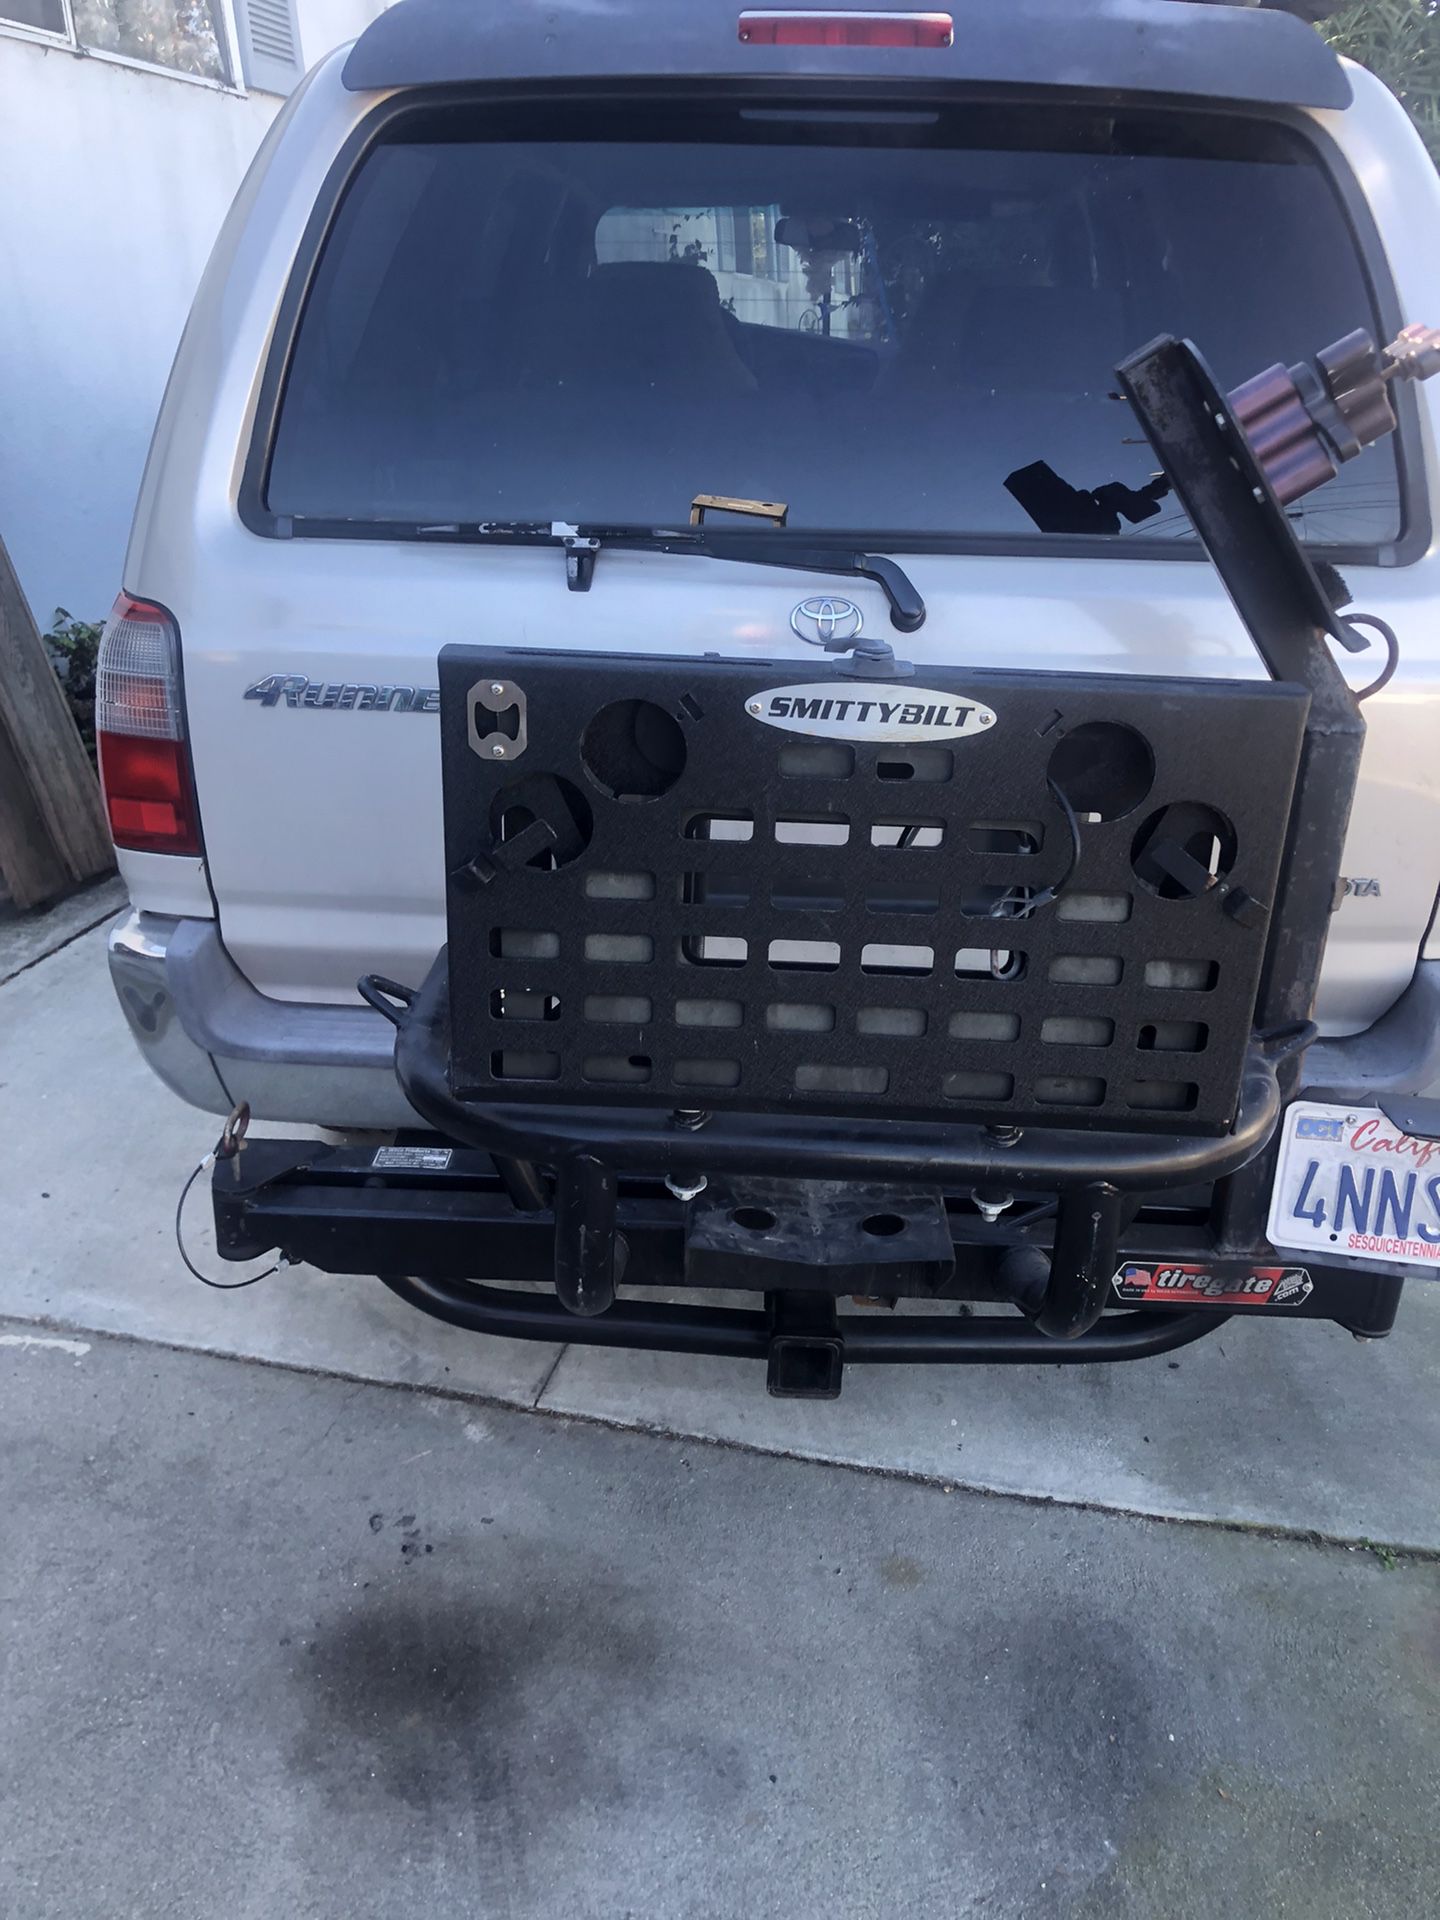 Wilco Max Trailer Toyota 4Runner Tire Gate Carrier With Additional Features